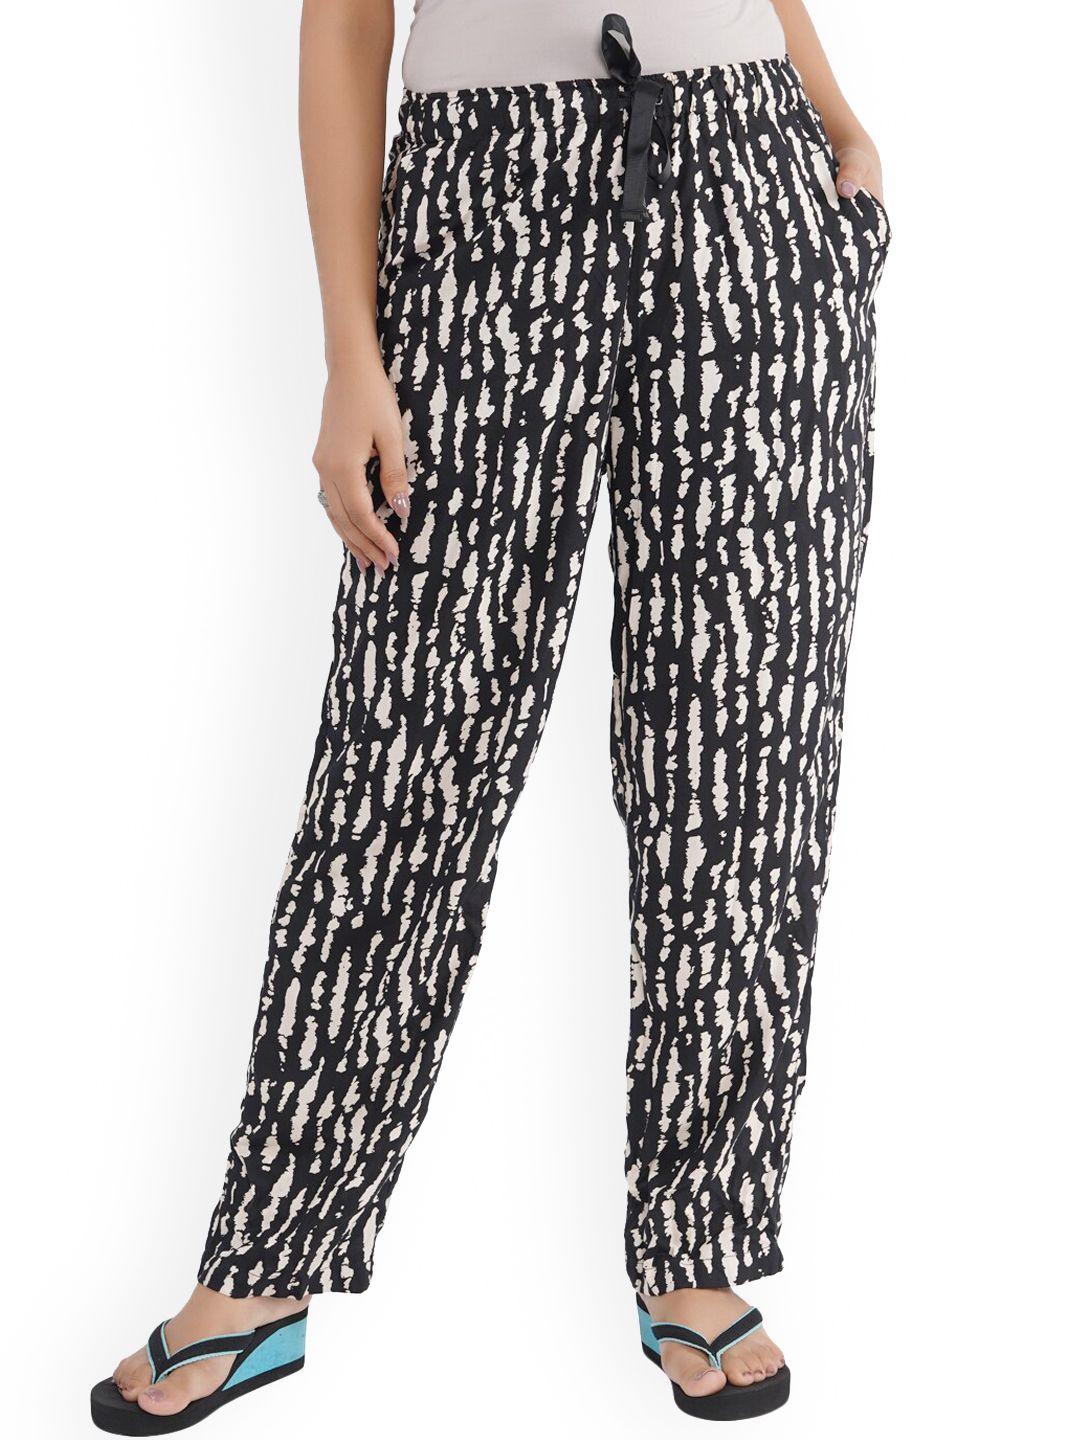 style shoes women black printed lounge pant